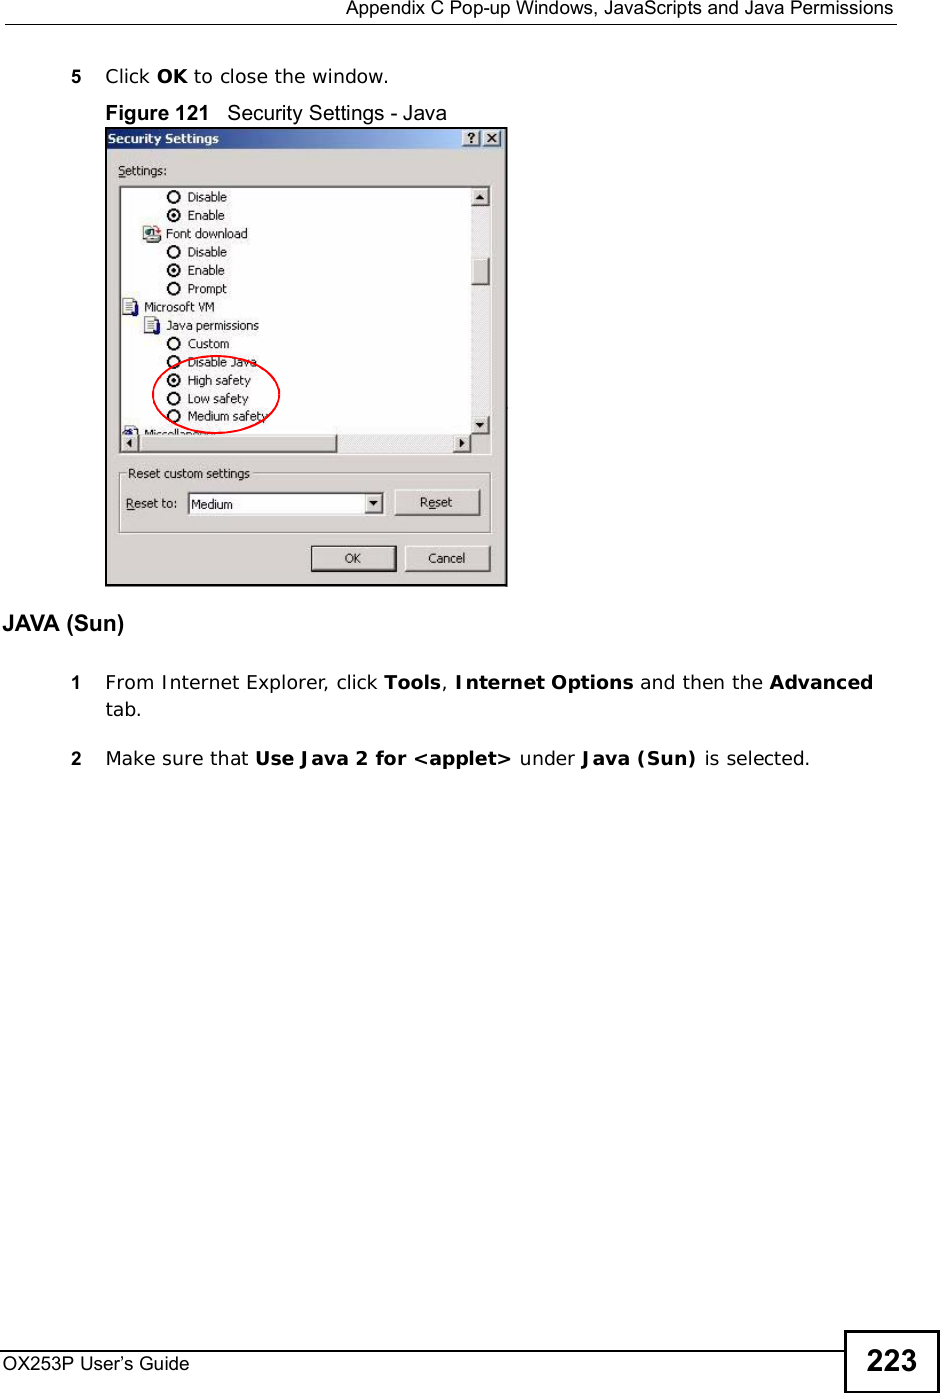  Appendix CPop-up Windows, JavaScripts and Java PermissionsOX253P User’s Guide 2235Click OK to close the window.Figure 121   Security Settings - Java JAVA (Sun)1From Internet Explorer, click Tools,Internet Options and then the Advancedtab. 2Make sure that Use Java 2 for &lt;applet&gt; under Java (Sun) is selected.